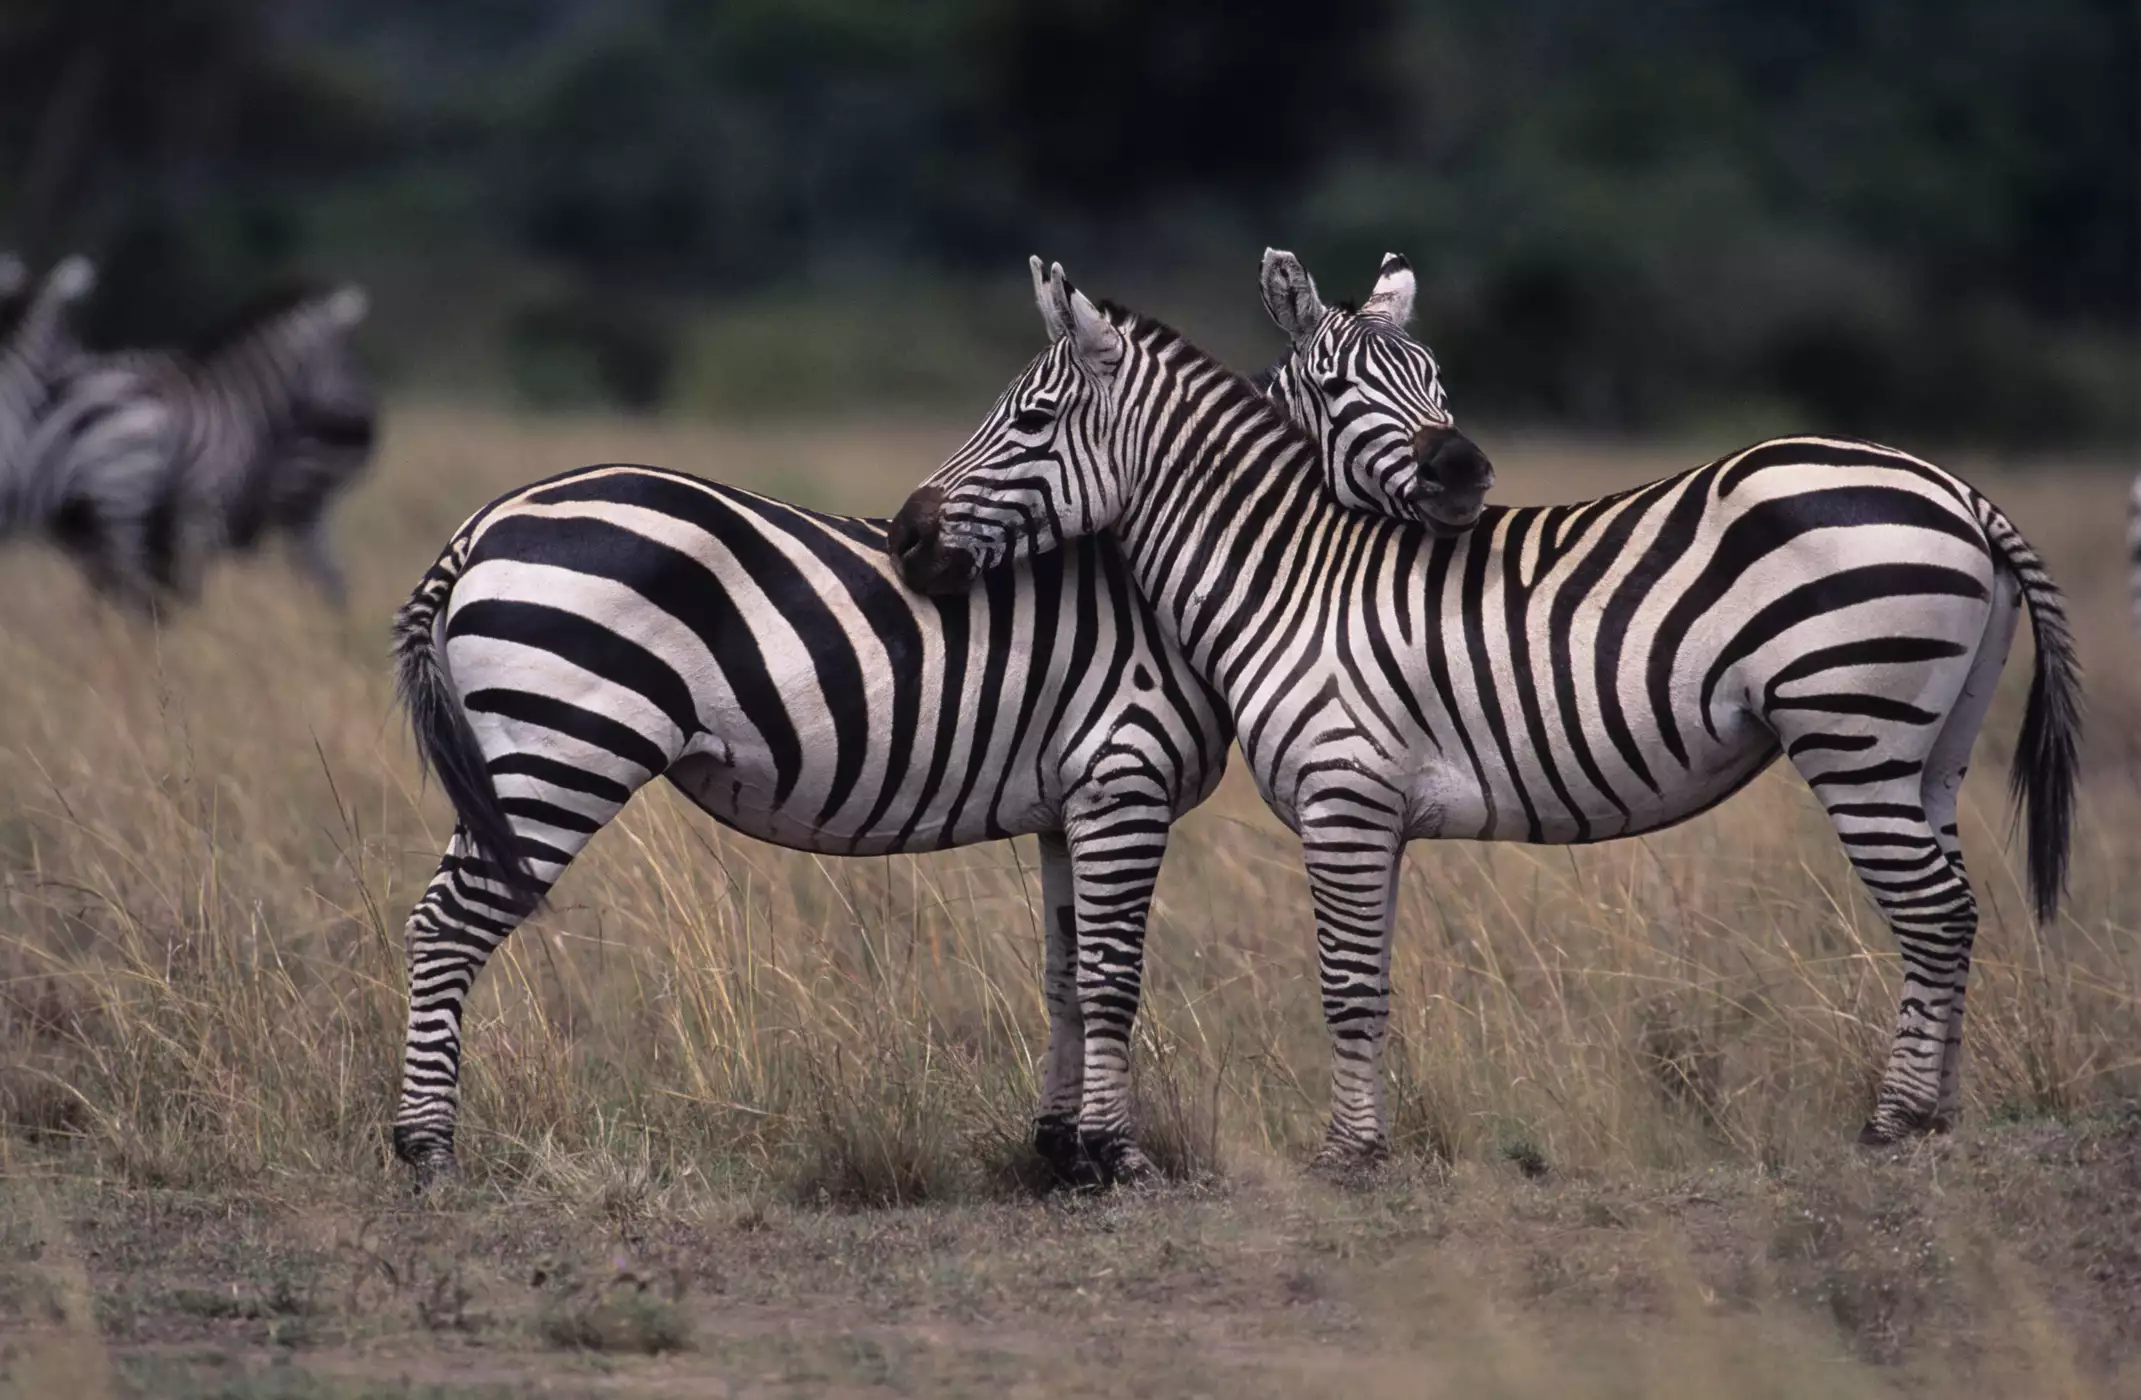 A pair of plains zebras entwined face to face